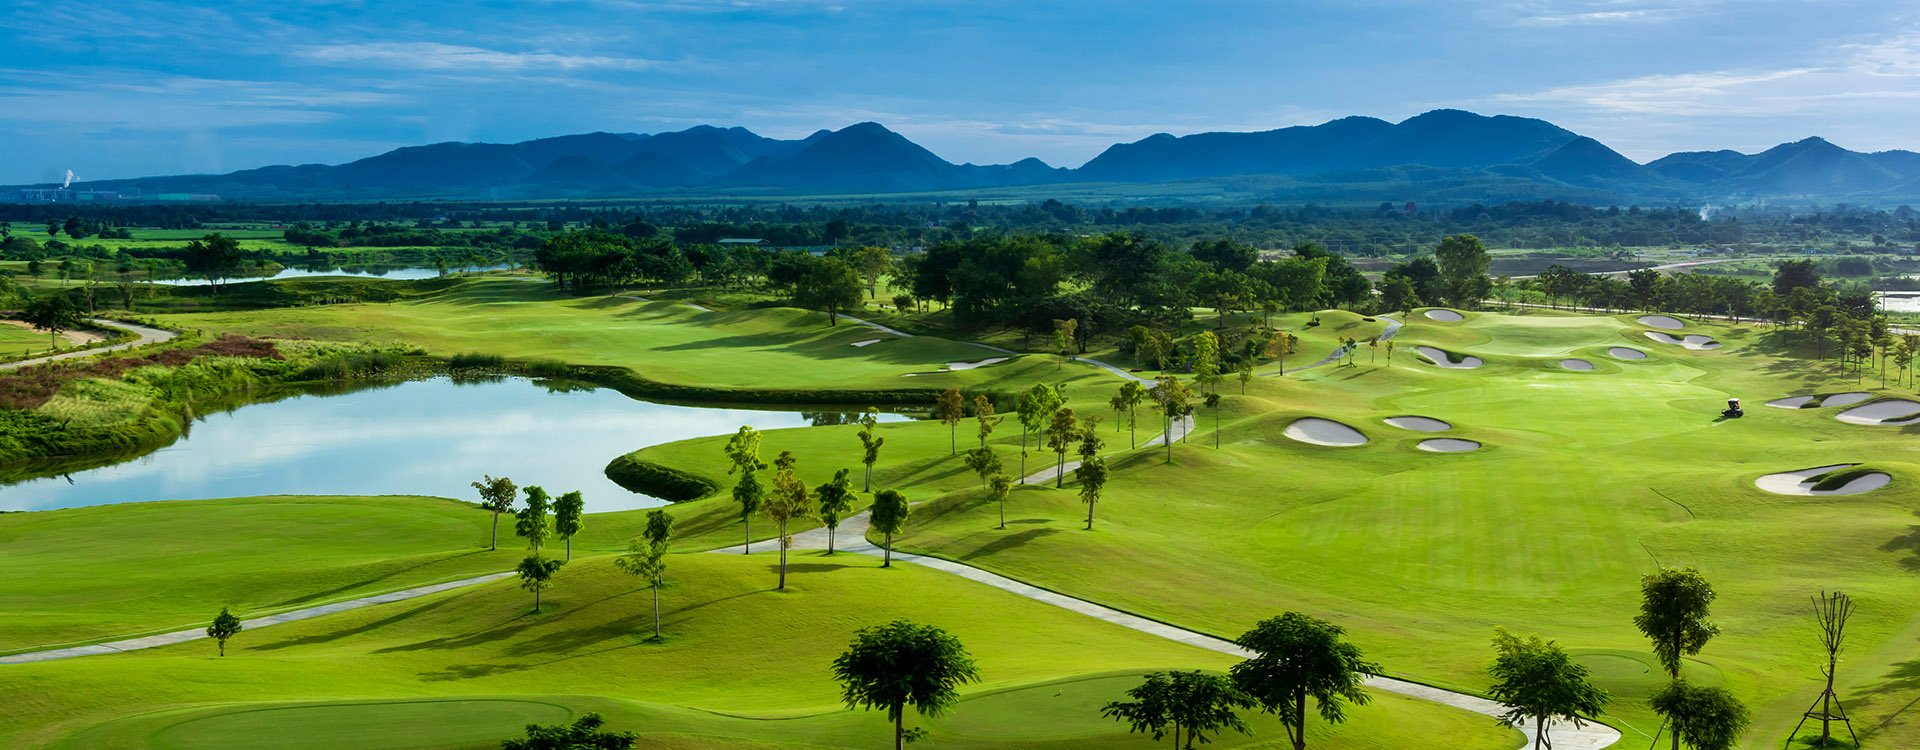 Golf course with a rich green turf beautiful scenery